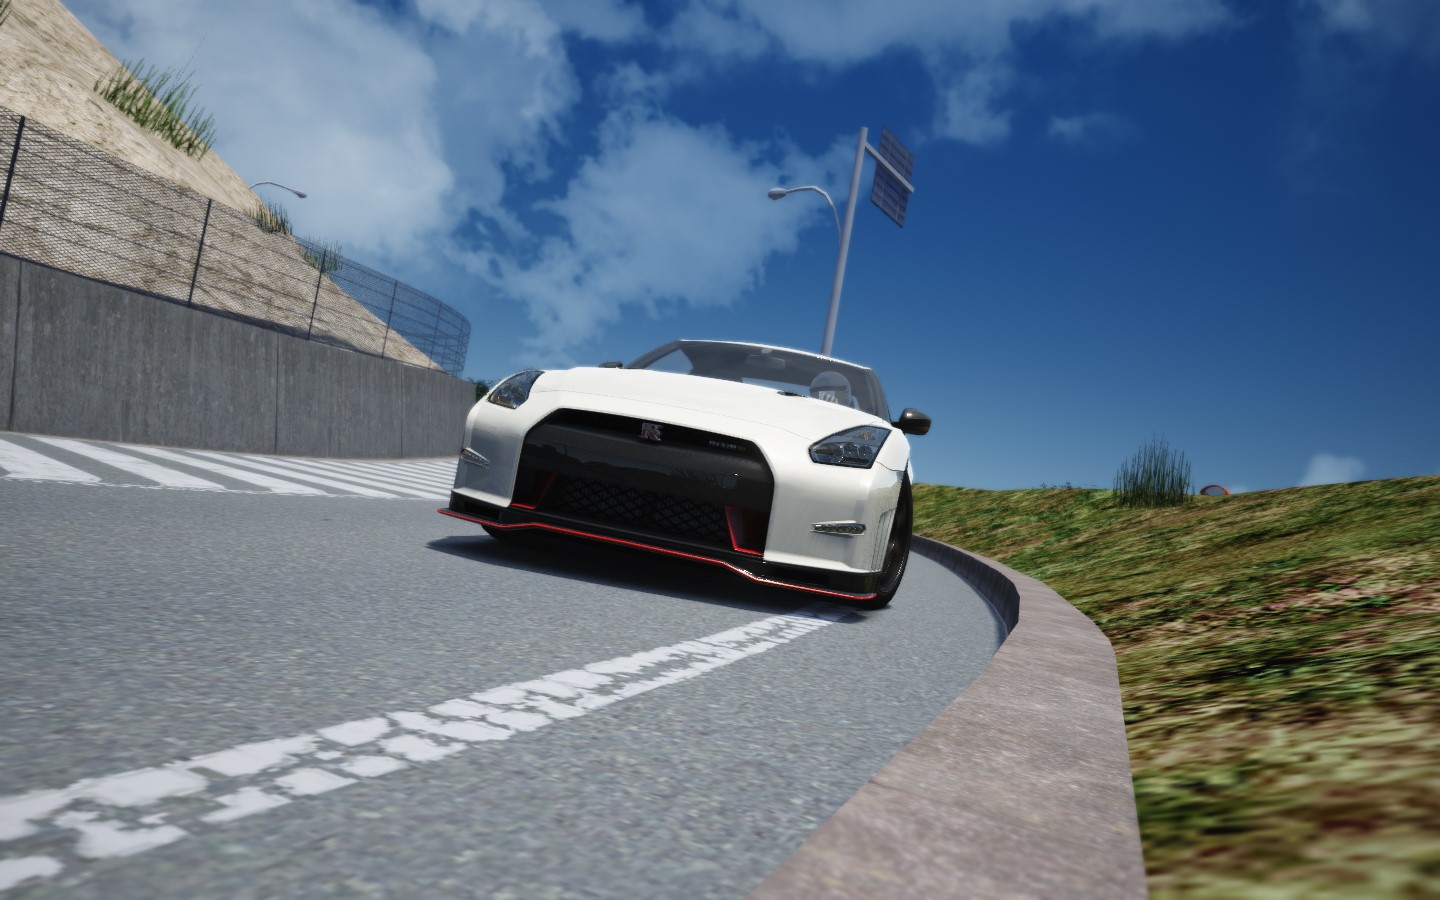 Nsuka 鳴門スカイライン for AssettoCorsa-converted from Nsuka1.70(rfactor1) 